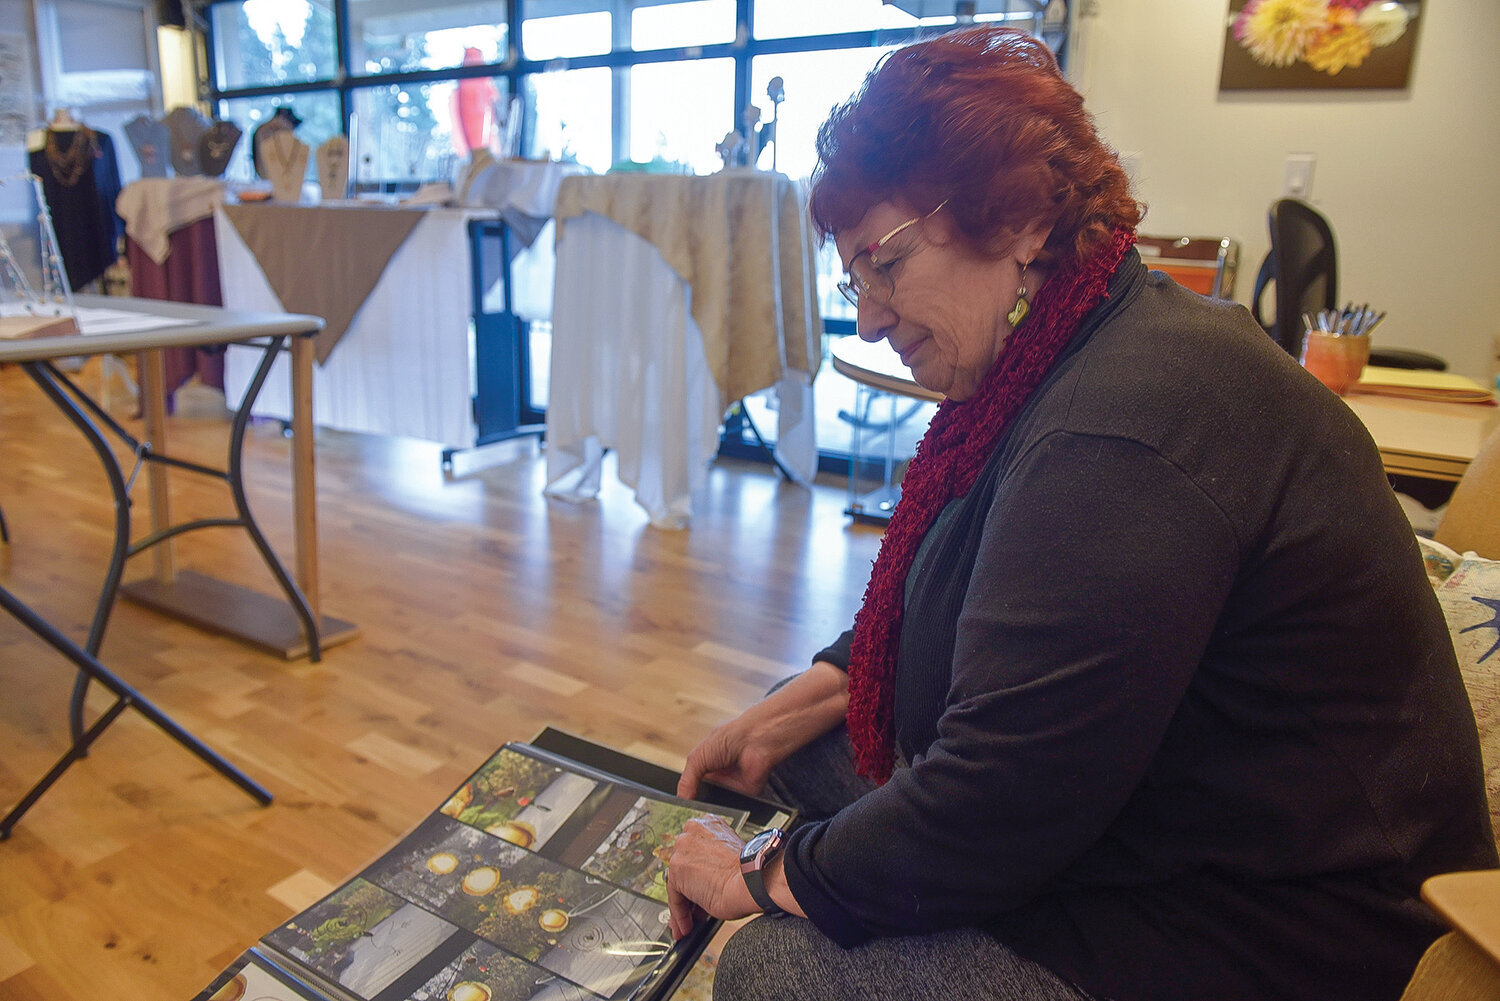 Jewelry artist Lois Steiner flips through a binder containing photographs of the art she’s created over the years.